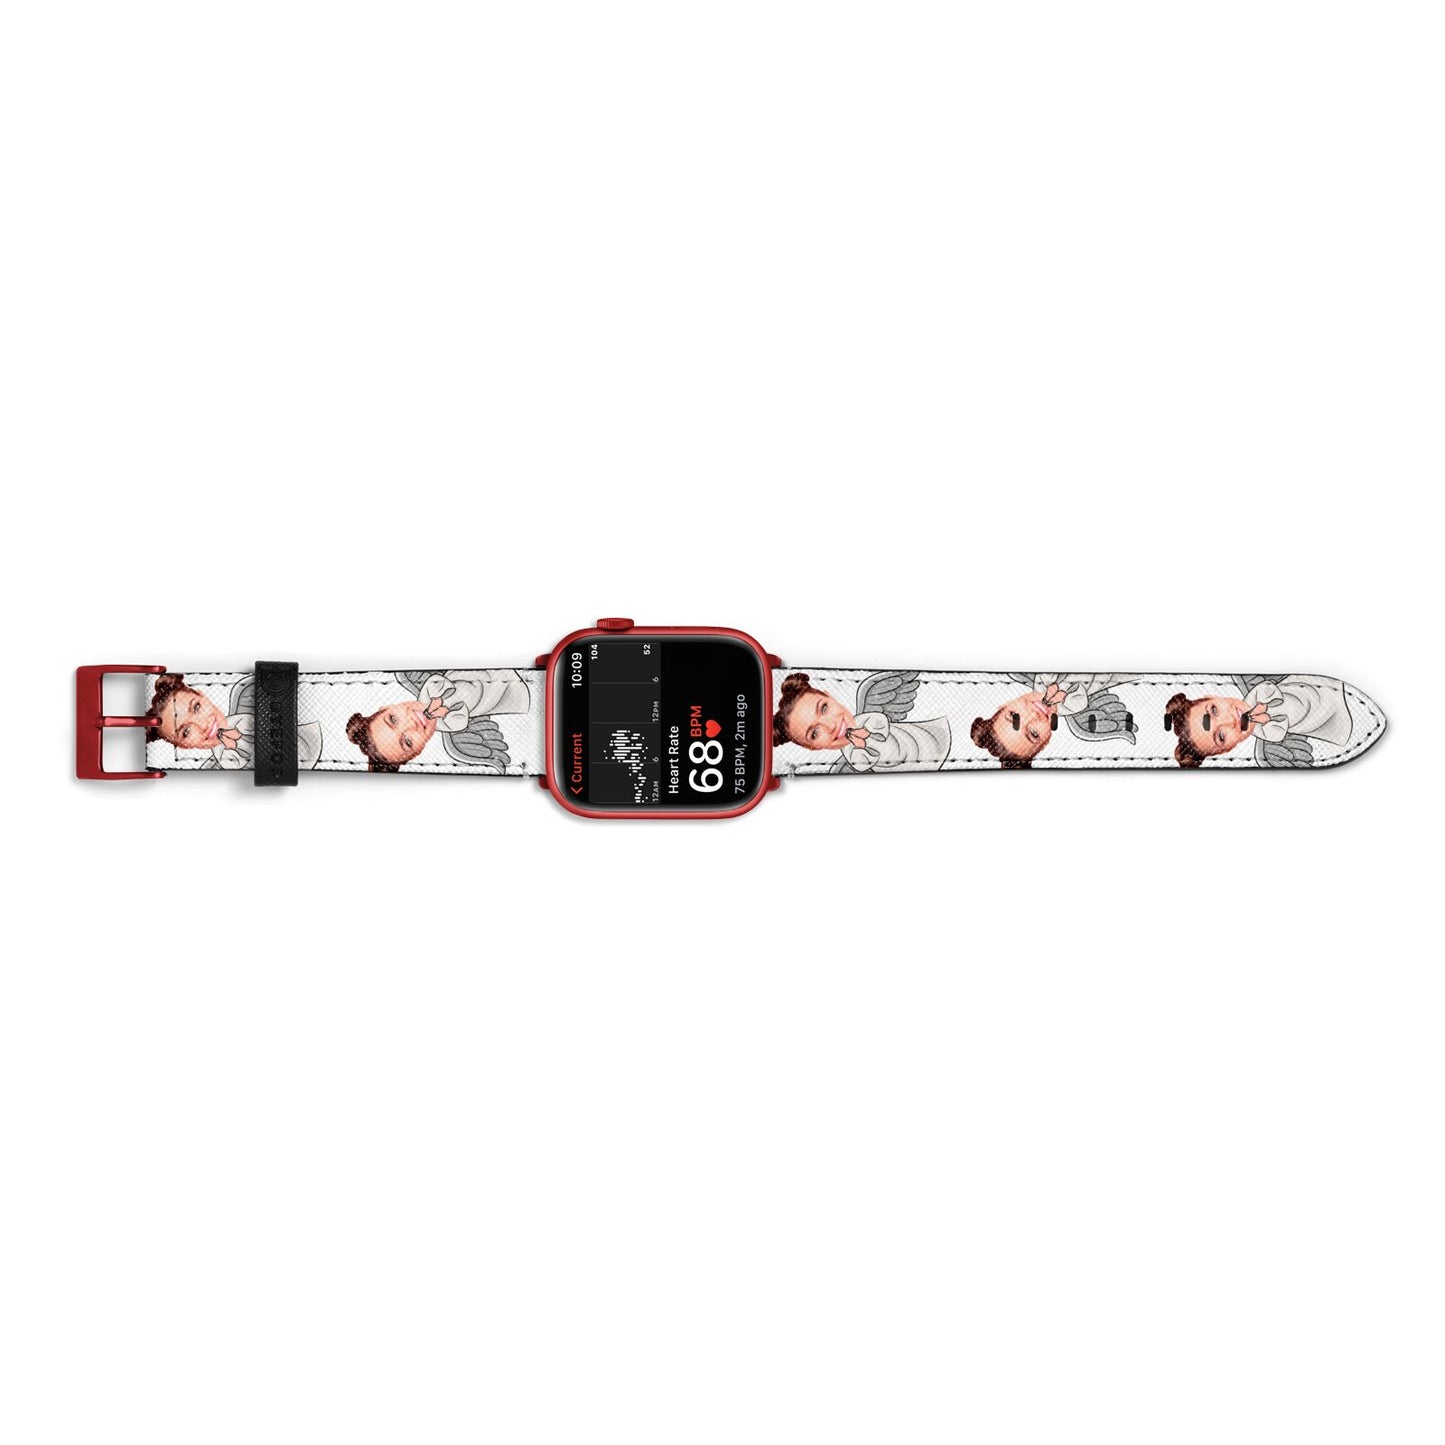 Angel Photo Face Apple Watch Strap Size 38mm Landscape Image Red Hardware